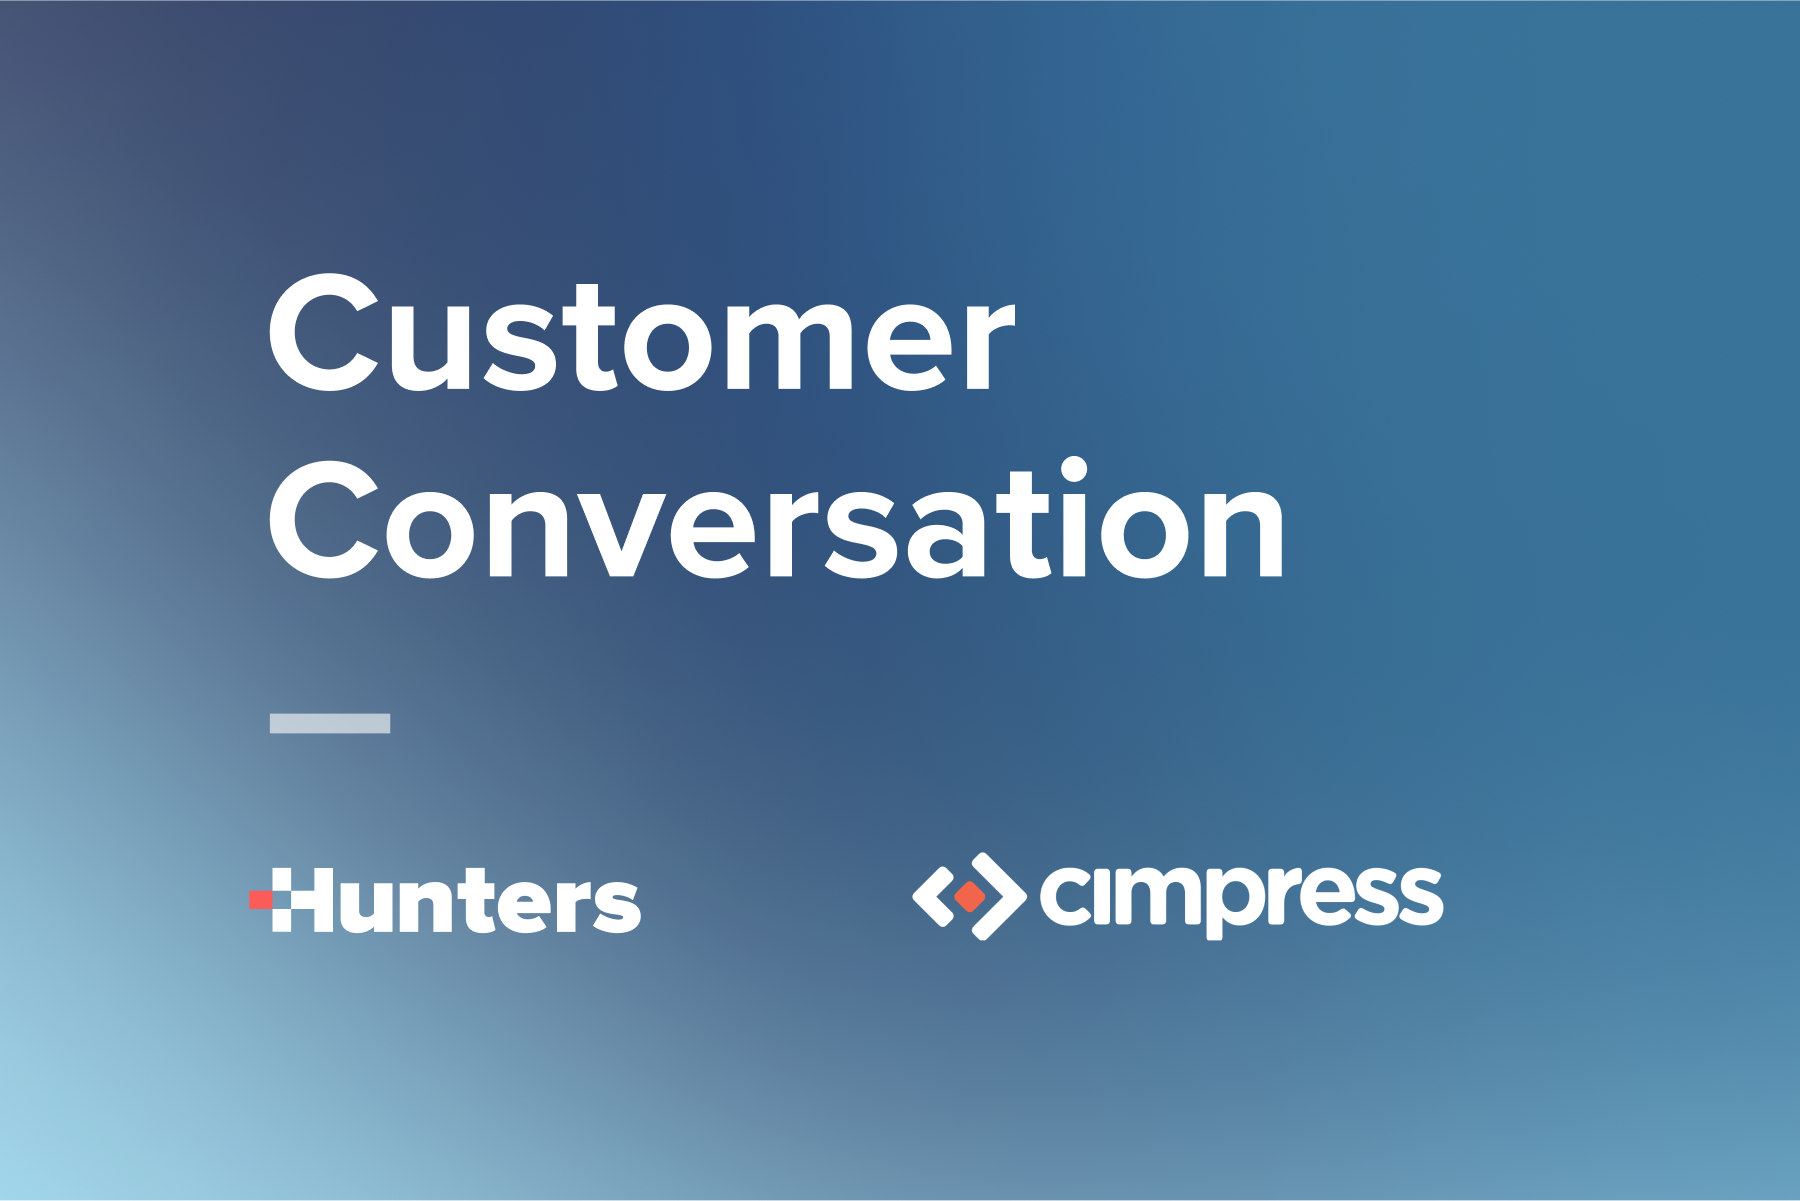 Customer Conversation – Cimpress deputy CISO on SOCs, SIEM, and Working with Hunters